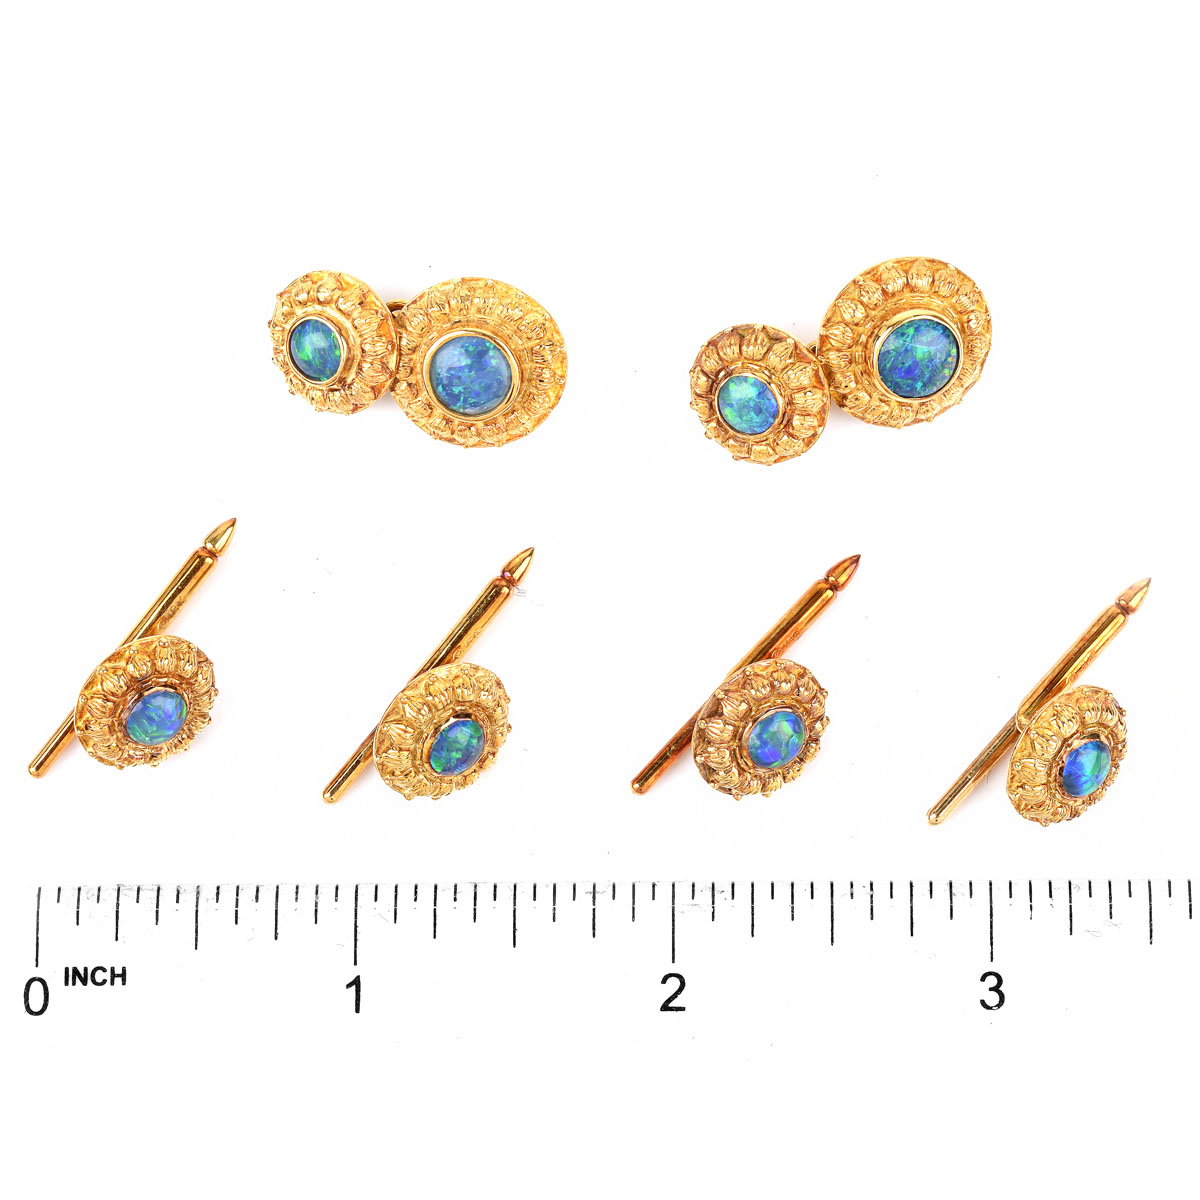 Man's Vintage Black Opal and 18 Karat Yellow Gold Six (6) Piece Dress Shirt Set Including Cufflinks and Four (4) Shirt Studs. Stamped 18K and Maker's Mark.